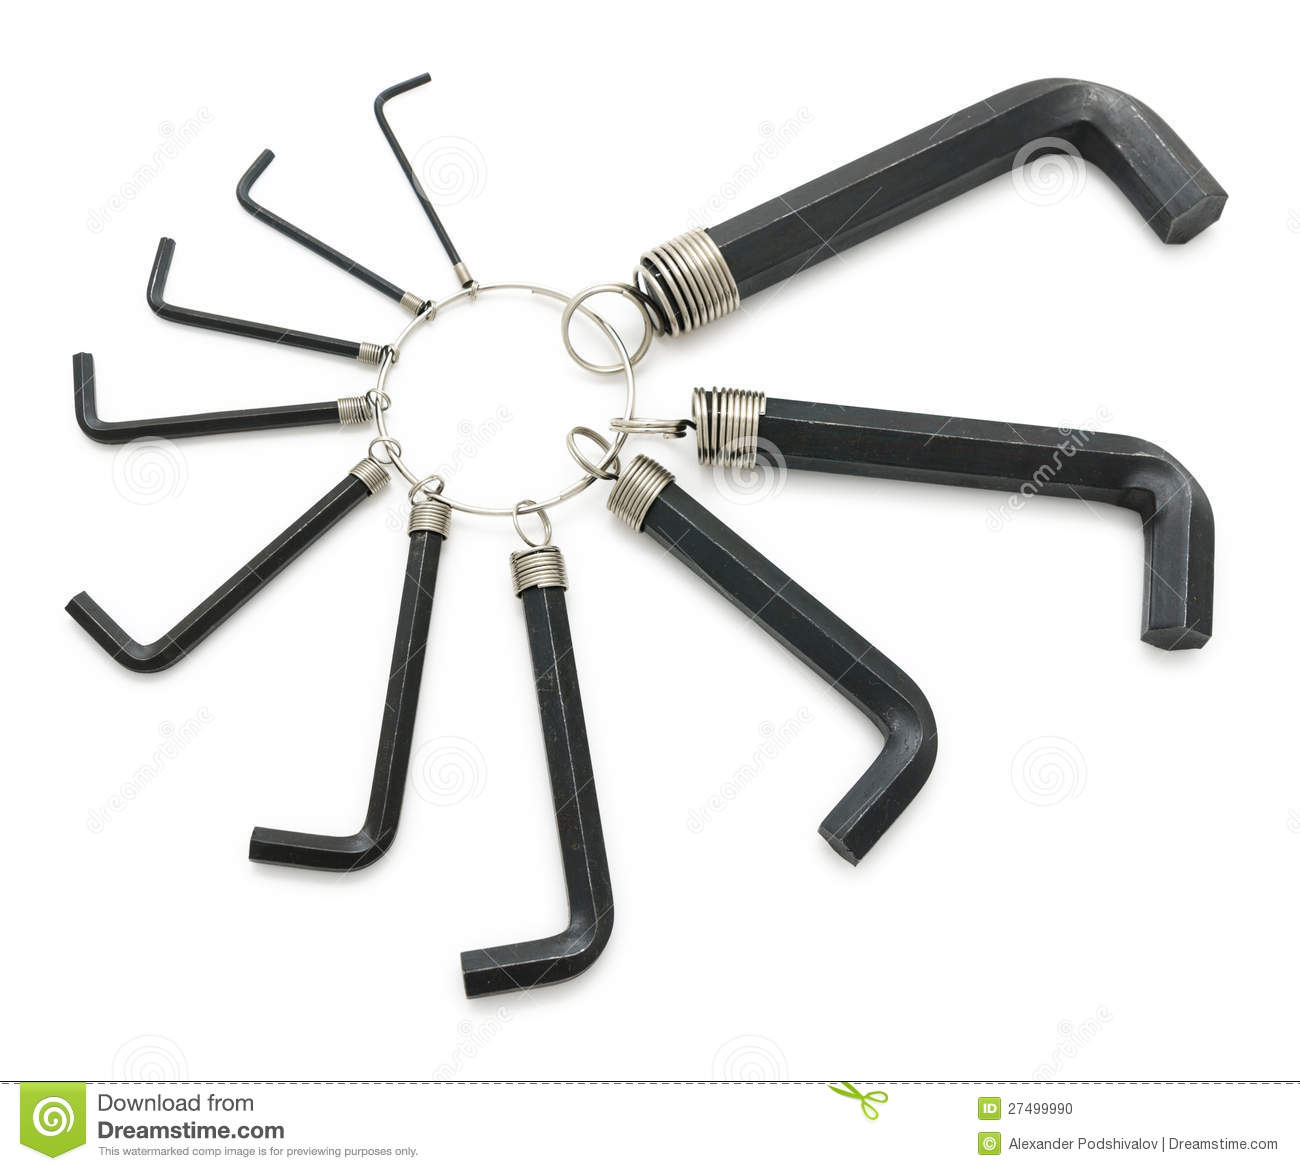 Hex Nut Wrenches Stock Photo   Image  27499990